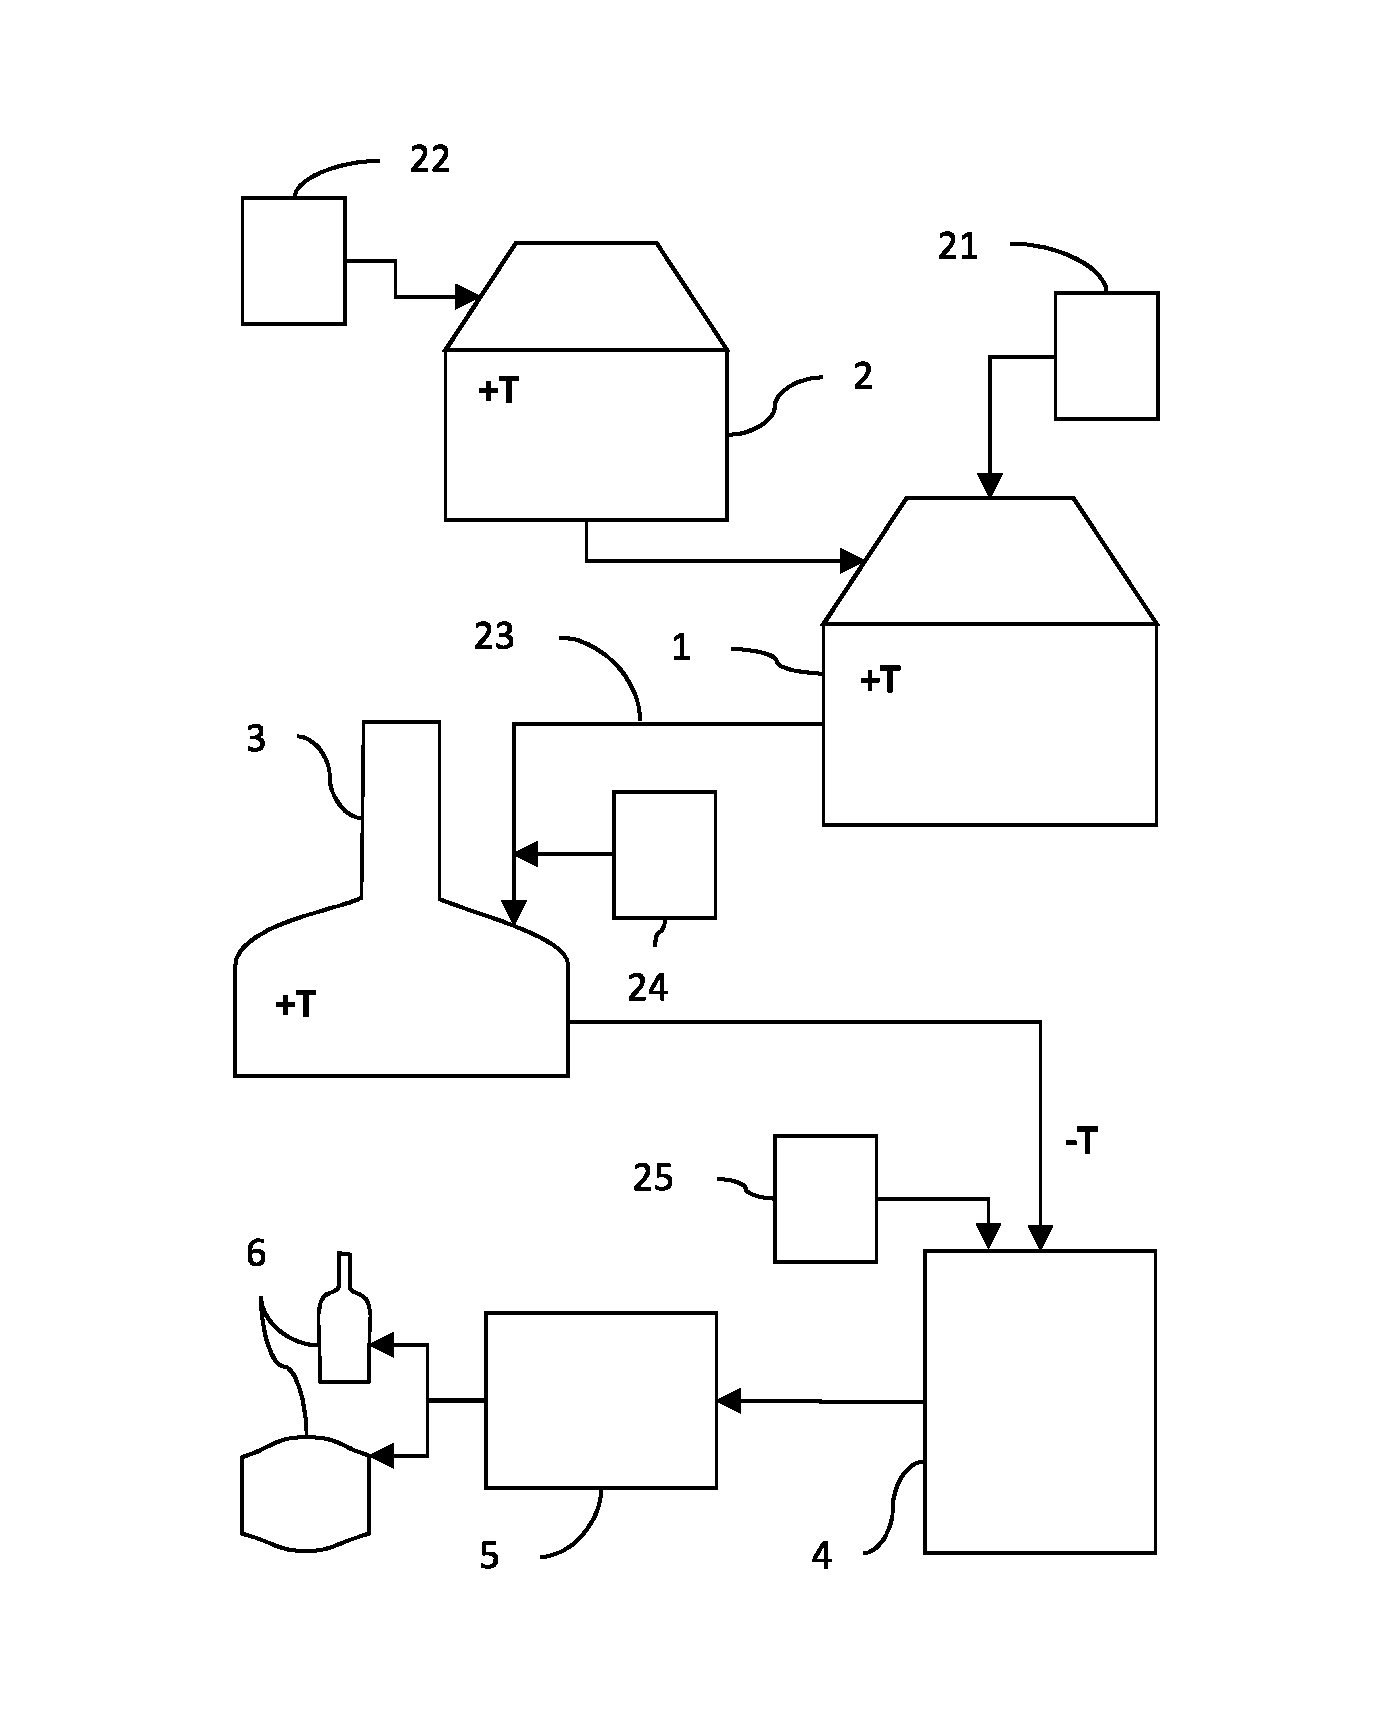 Low Alcohol or Alcohol Free Fermented Malt Based Beverage and Method for Producing It